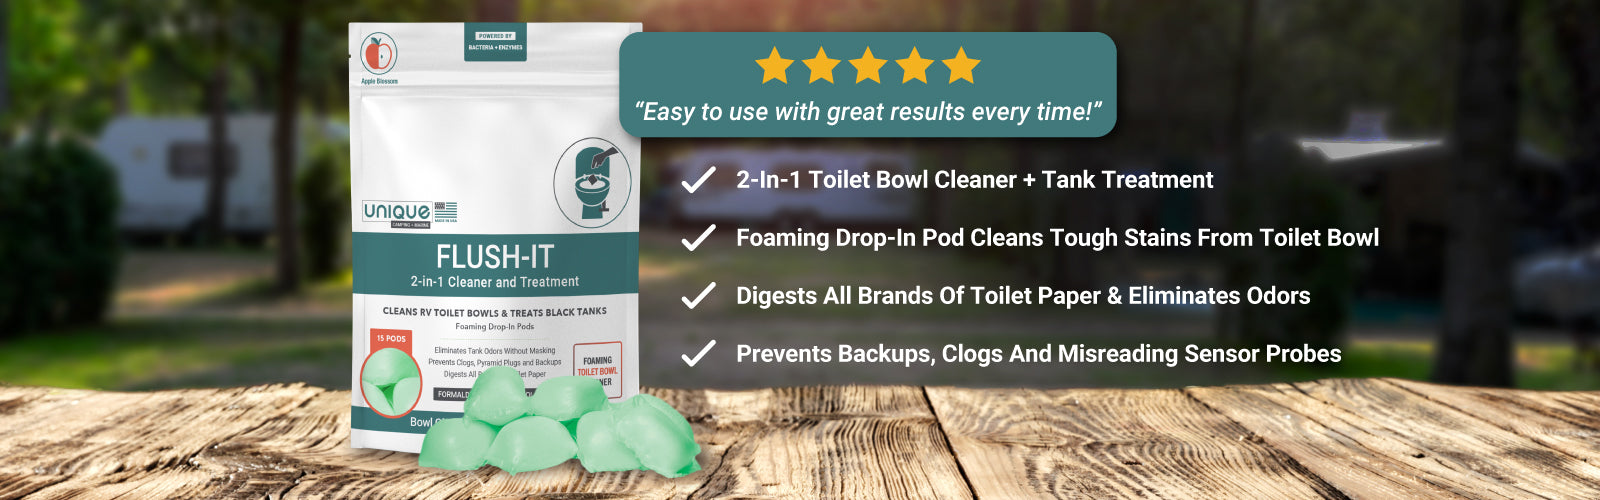 Flush-It 2-in-1 Toilet Cleaner and Tank Treatment